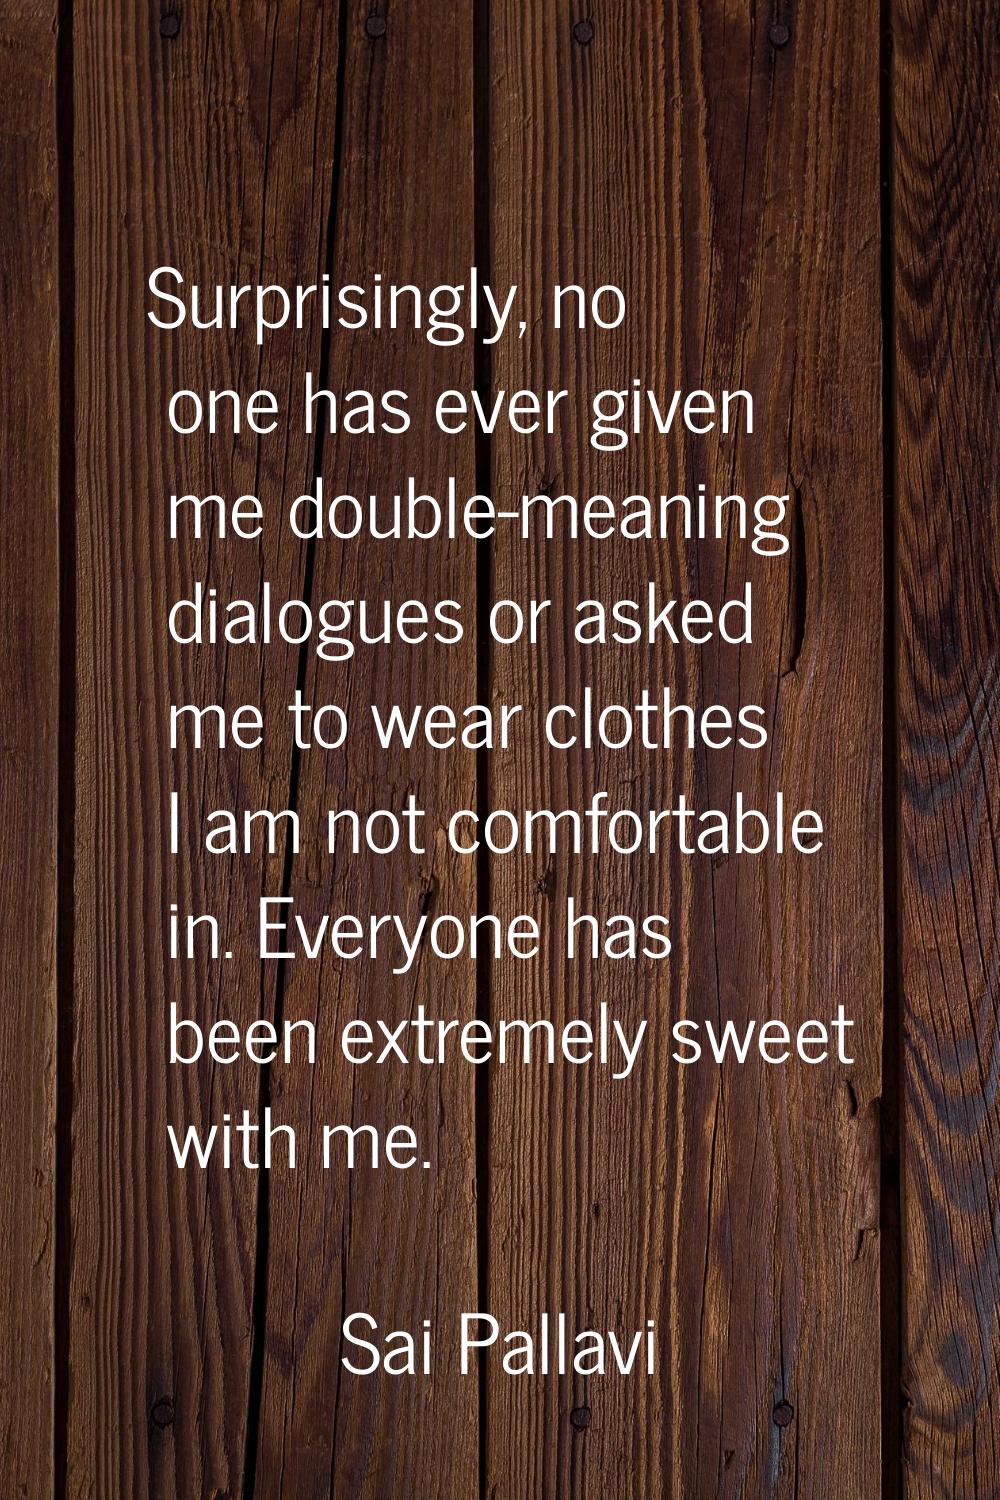 Surprisingly, no one has ever given me double-meaning dialogues or asked me to wear clothes I am no